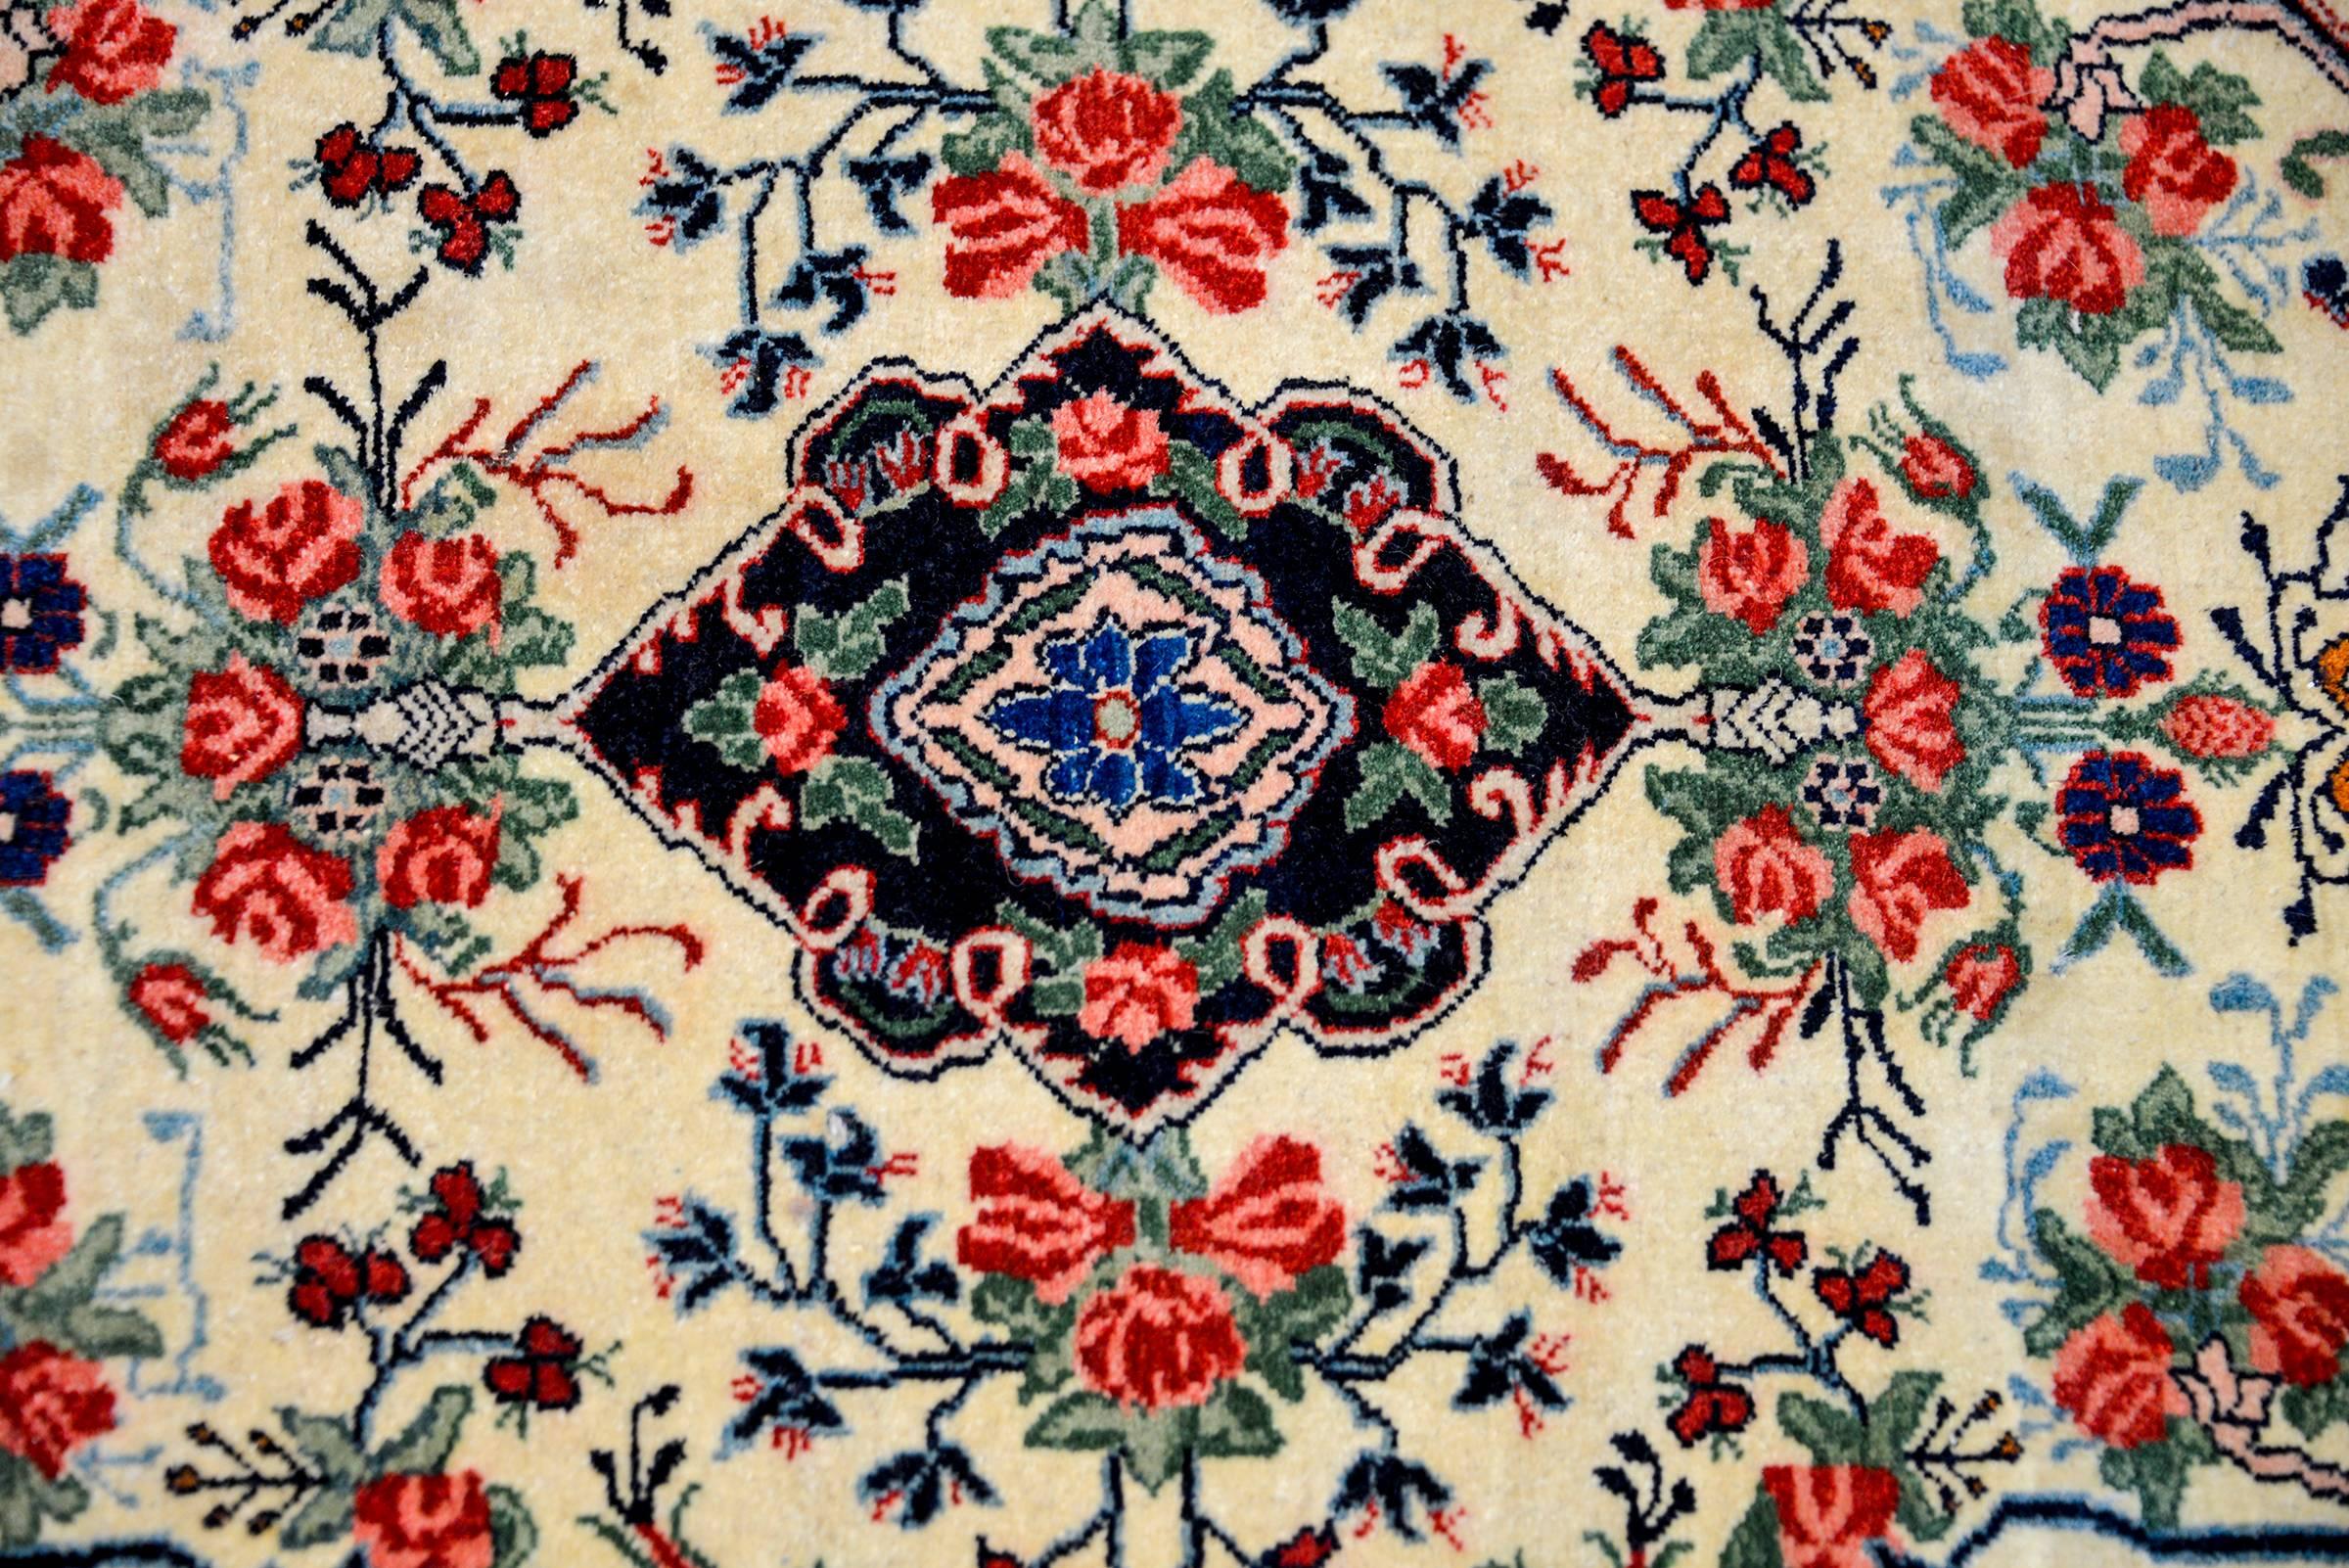 A sweet early 20th century petite Persian Bidjar rug with a beautiful floral pattern woven in red, indigo, green, and pink, on a cream colored background surrounded a by a complimentary border on a dark indigo background.